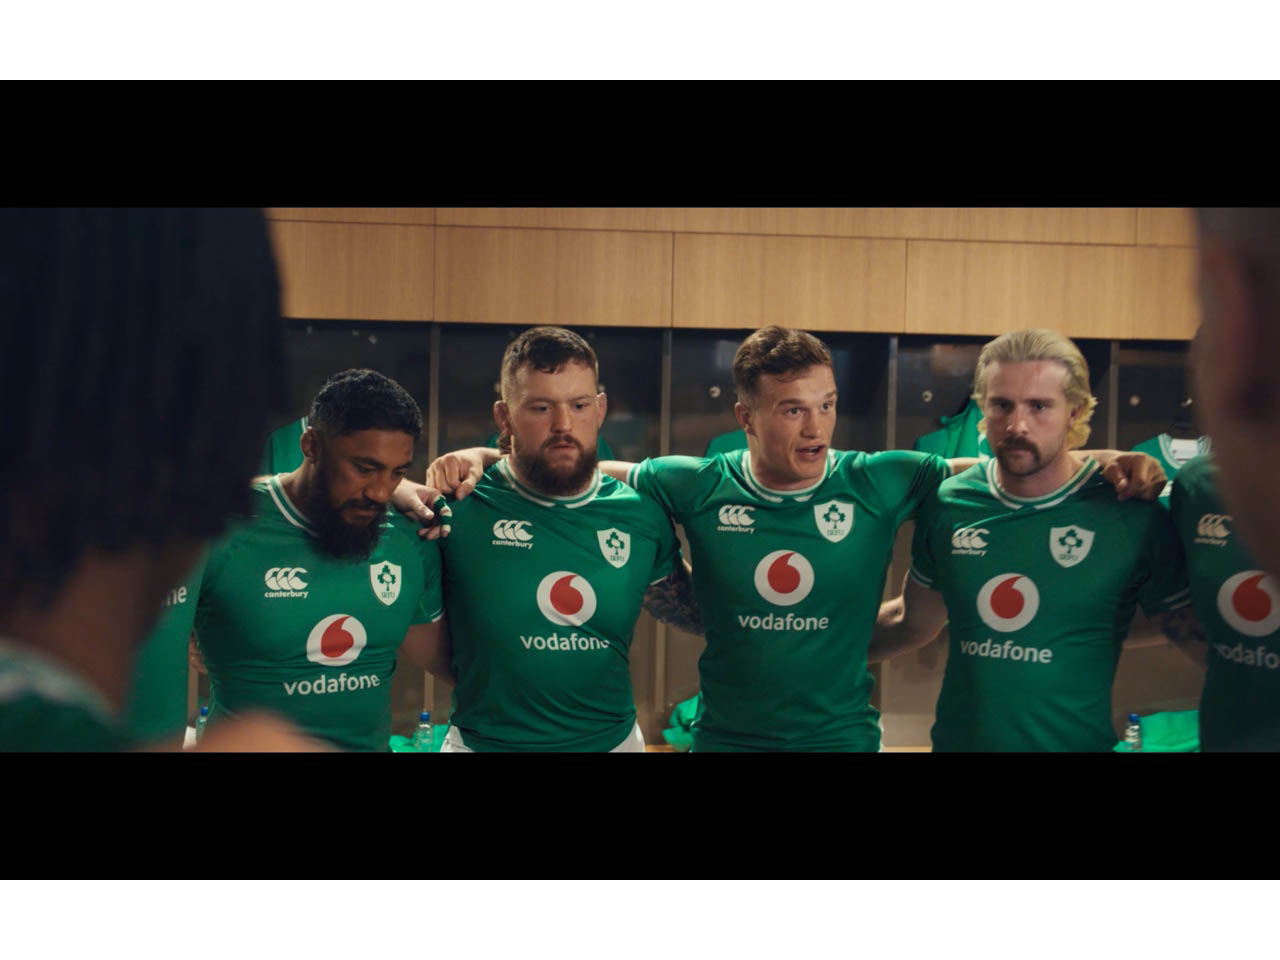 Oscar winning director, Tom Hooper and Folk Wunderman Thompson capture the spirit of Irish rugby squad in new Vodafone campaign 